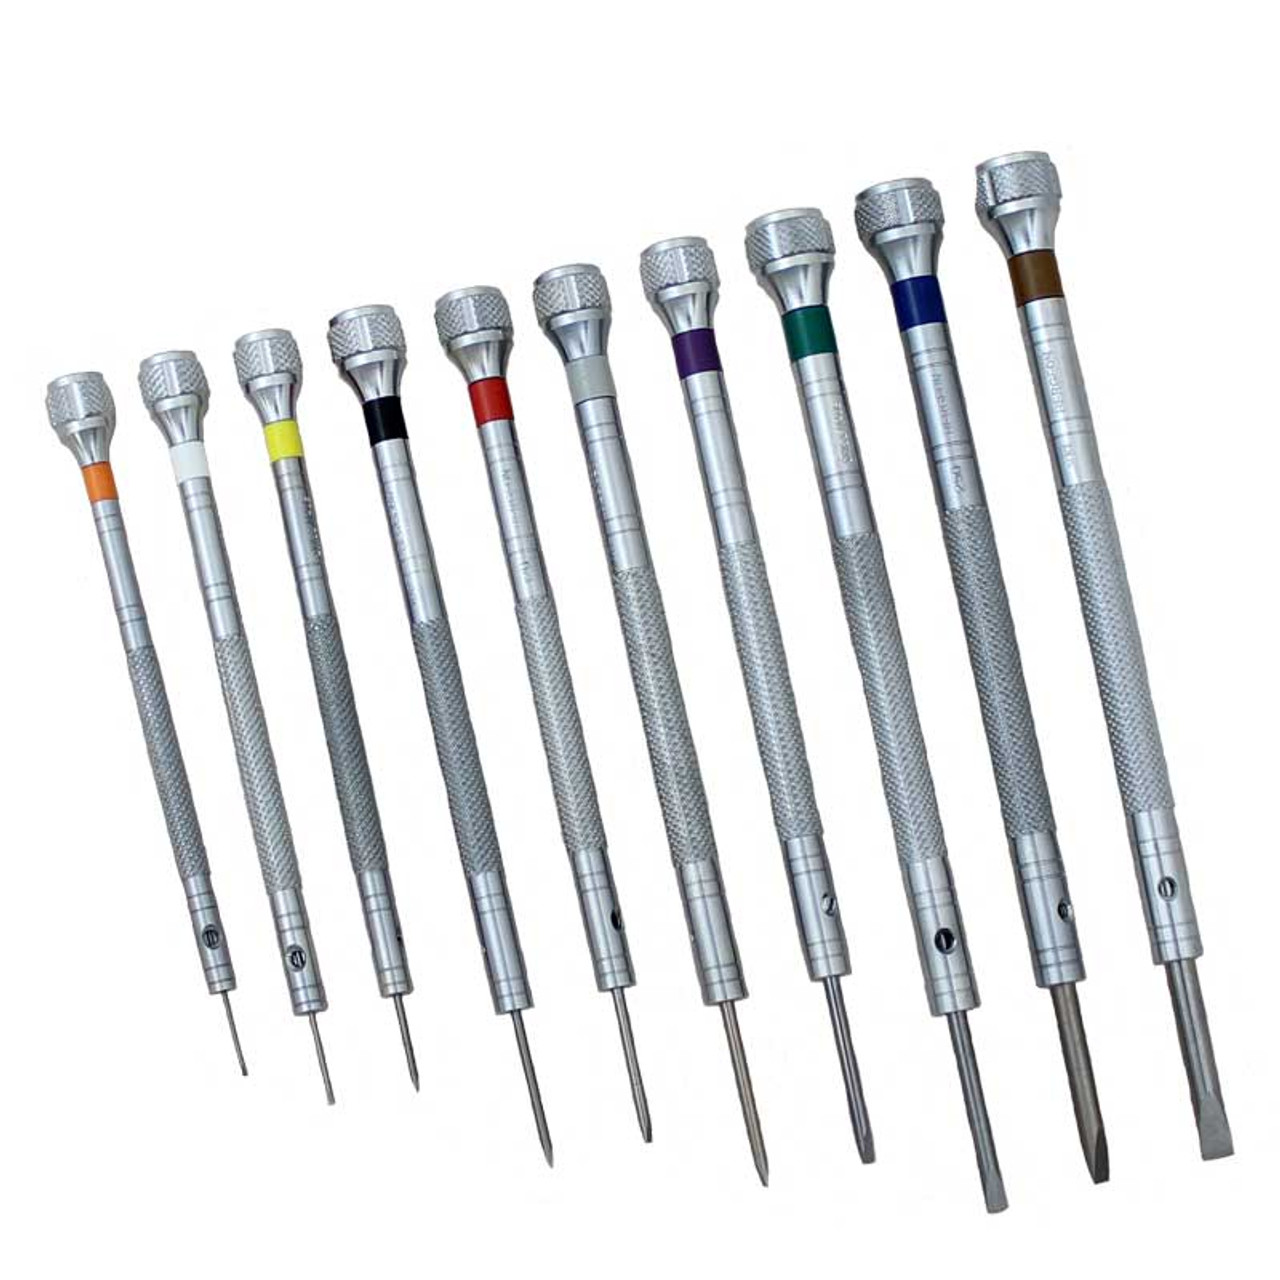 BERGEON® Set of 5 Watchmakers Screwdrivers in Pouch - SEP Tools